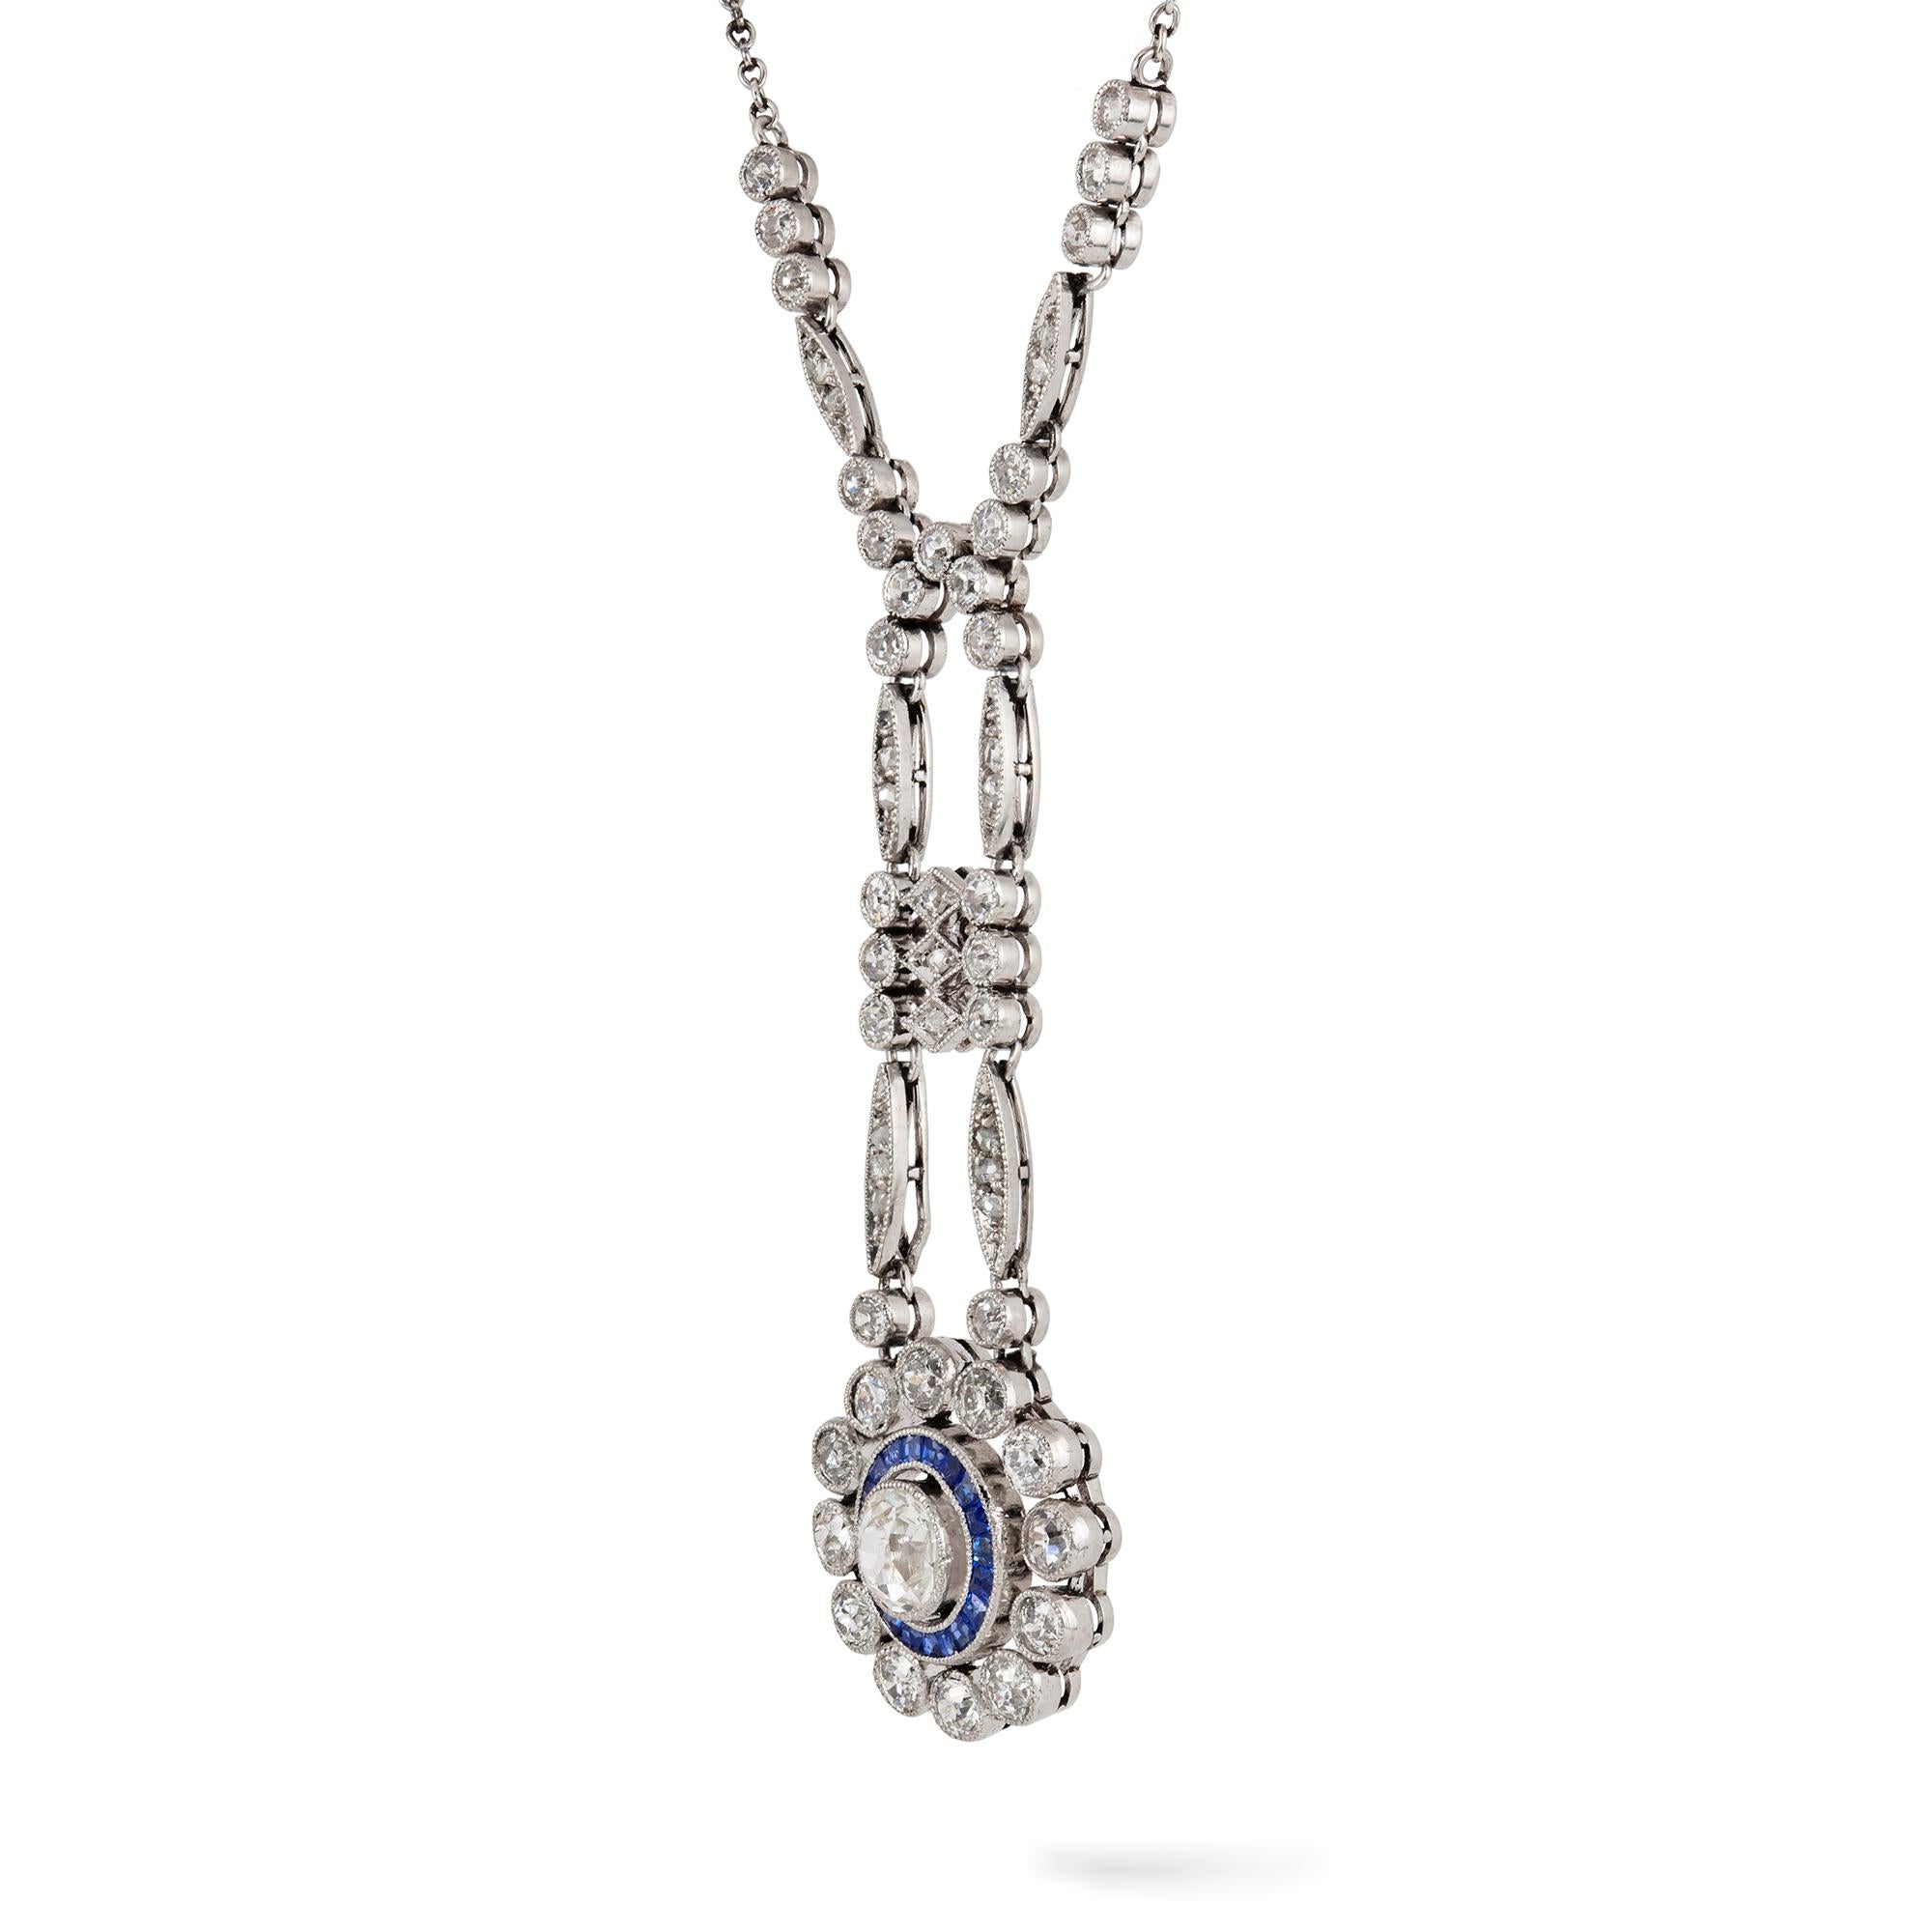 An Edwardian diamond and sapphire necklet, to the centre an old European-cut diamond estimated to weigh 0.75 carats, surrounded by a row of calibrated sapphires and an outer row of twelve round old-cut diamonds, all suspended by a run consisted of